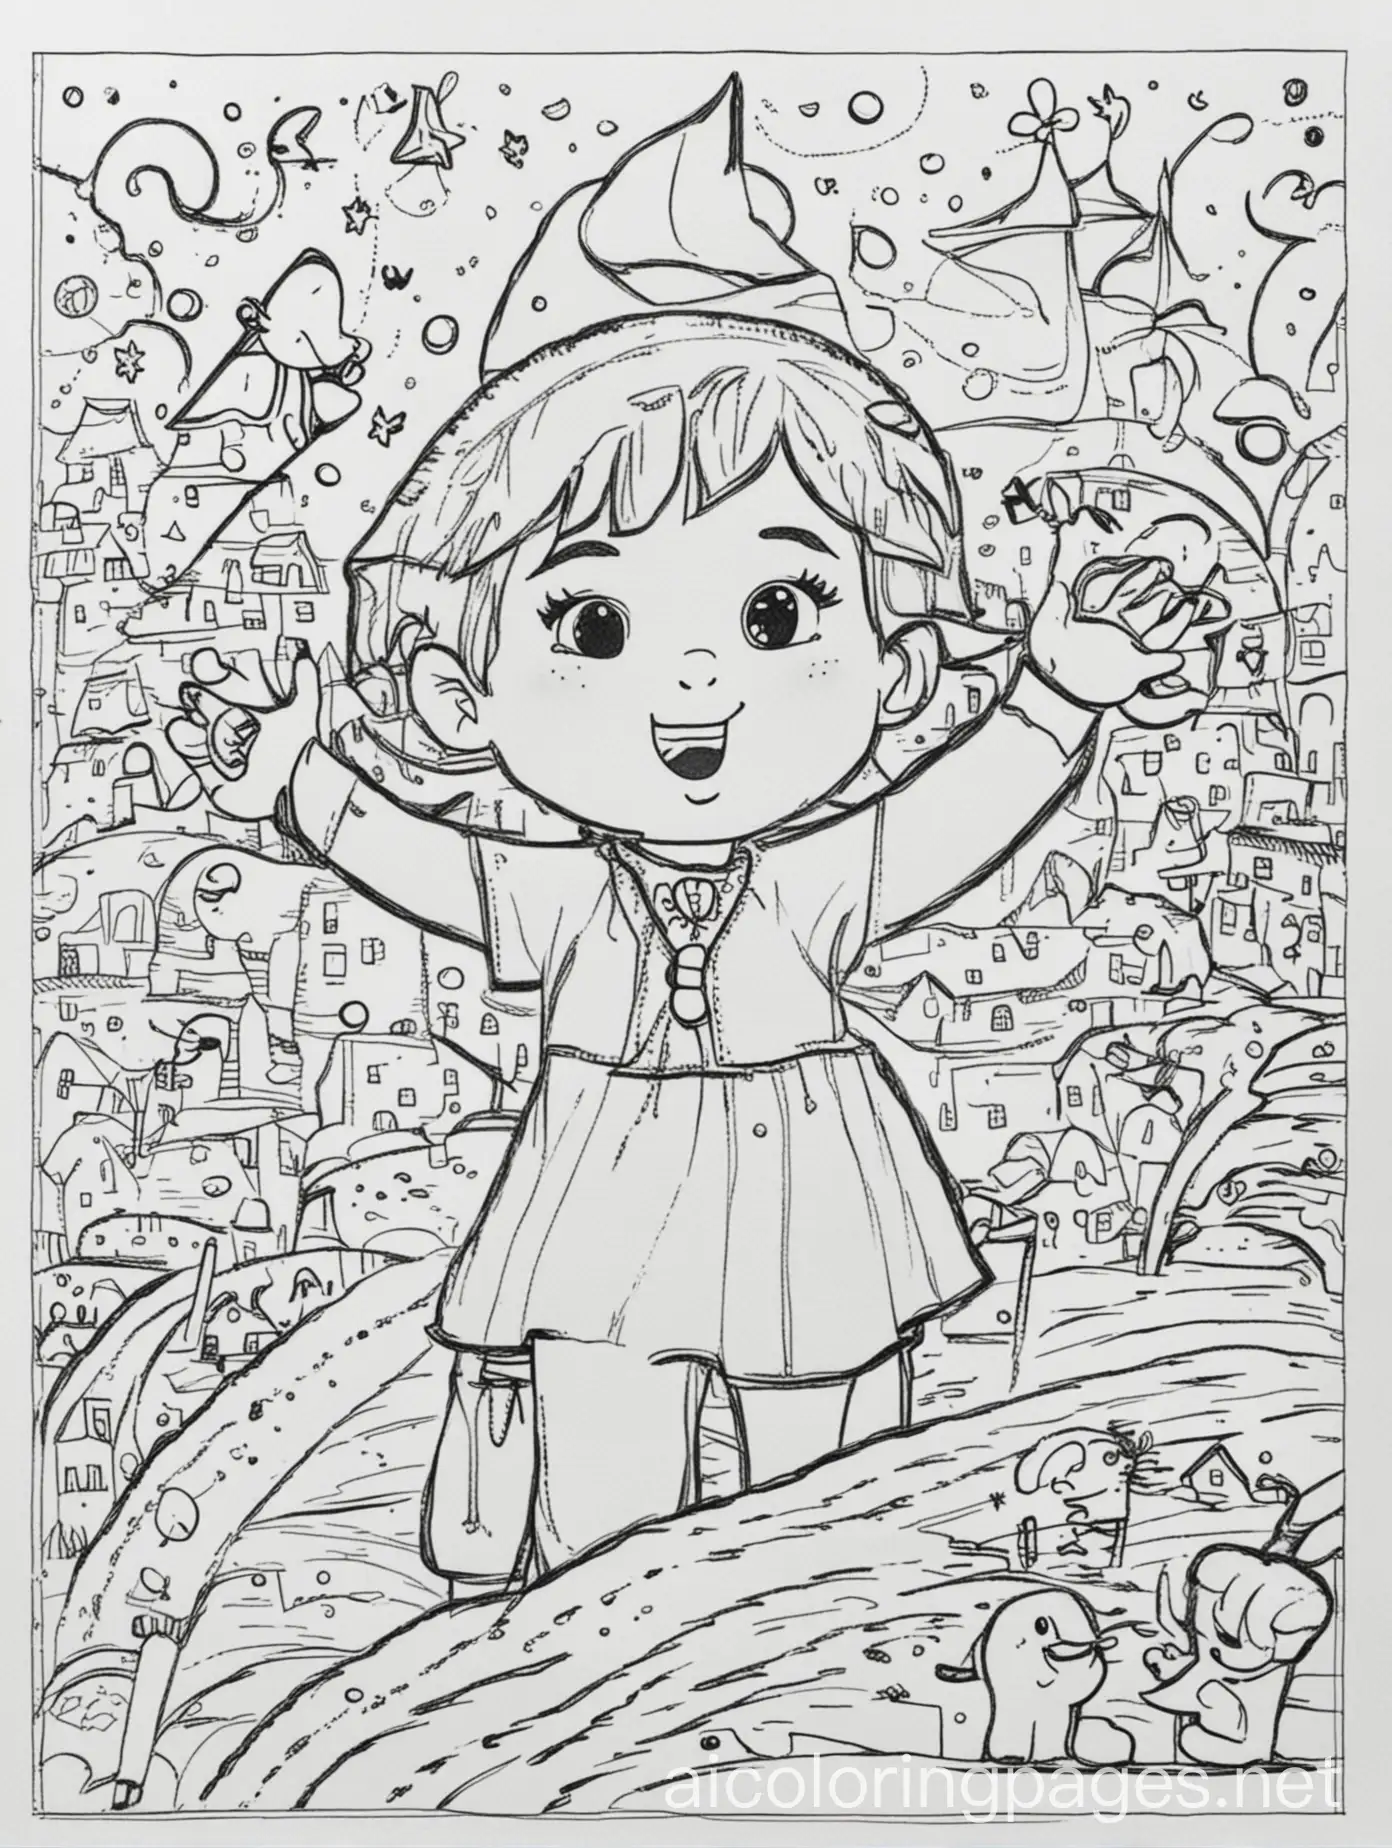 Kid's Fun. New Year, Coloring Page, black and white, line art, white background, Simplicity, Ample White Space. The background of the coloring page is plain white to make it easy for young children to color within the lines. The outlines of all the subjects are easy to distinguish, making it simple for kids to color without too much difficulty